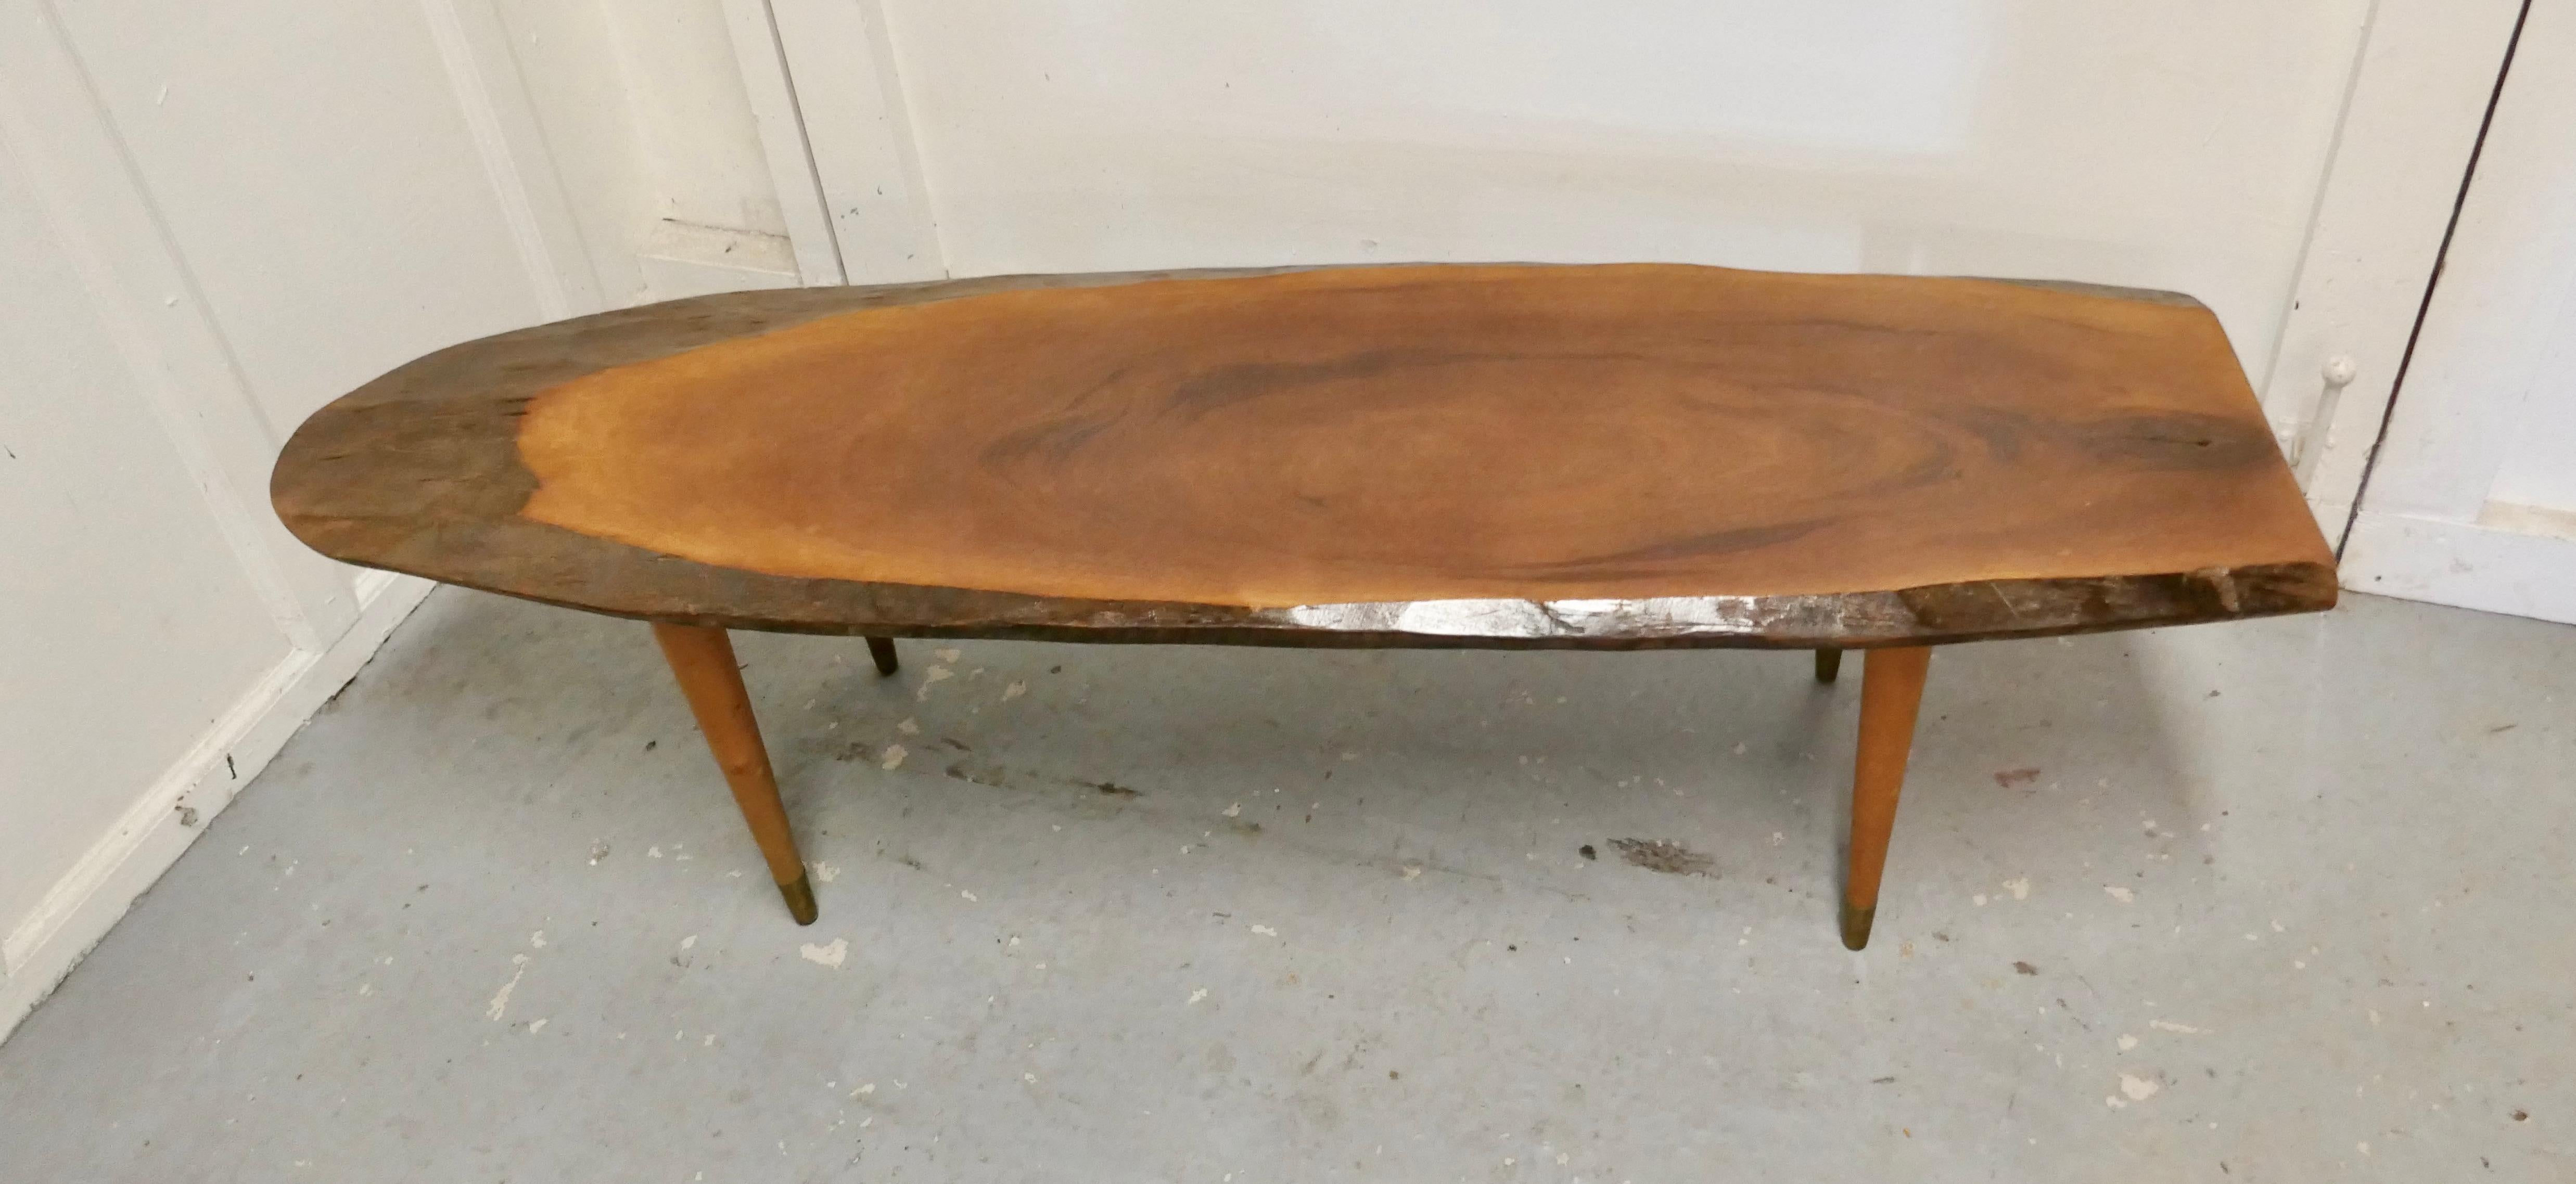 Country Mid Century Slice of Fruitwood Coffee Table For Sale